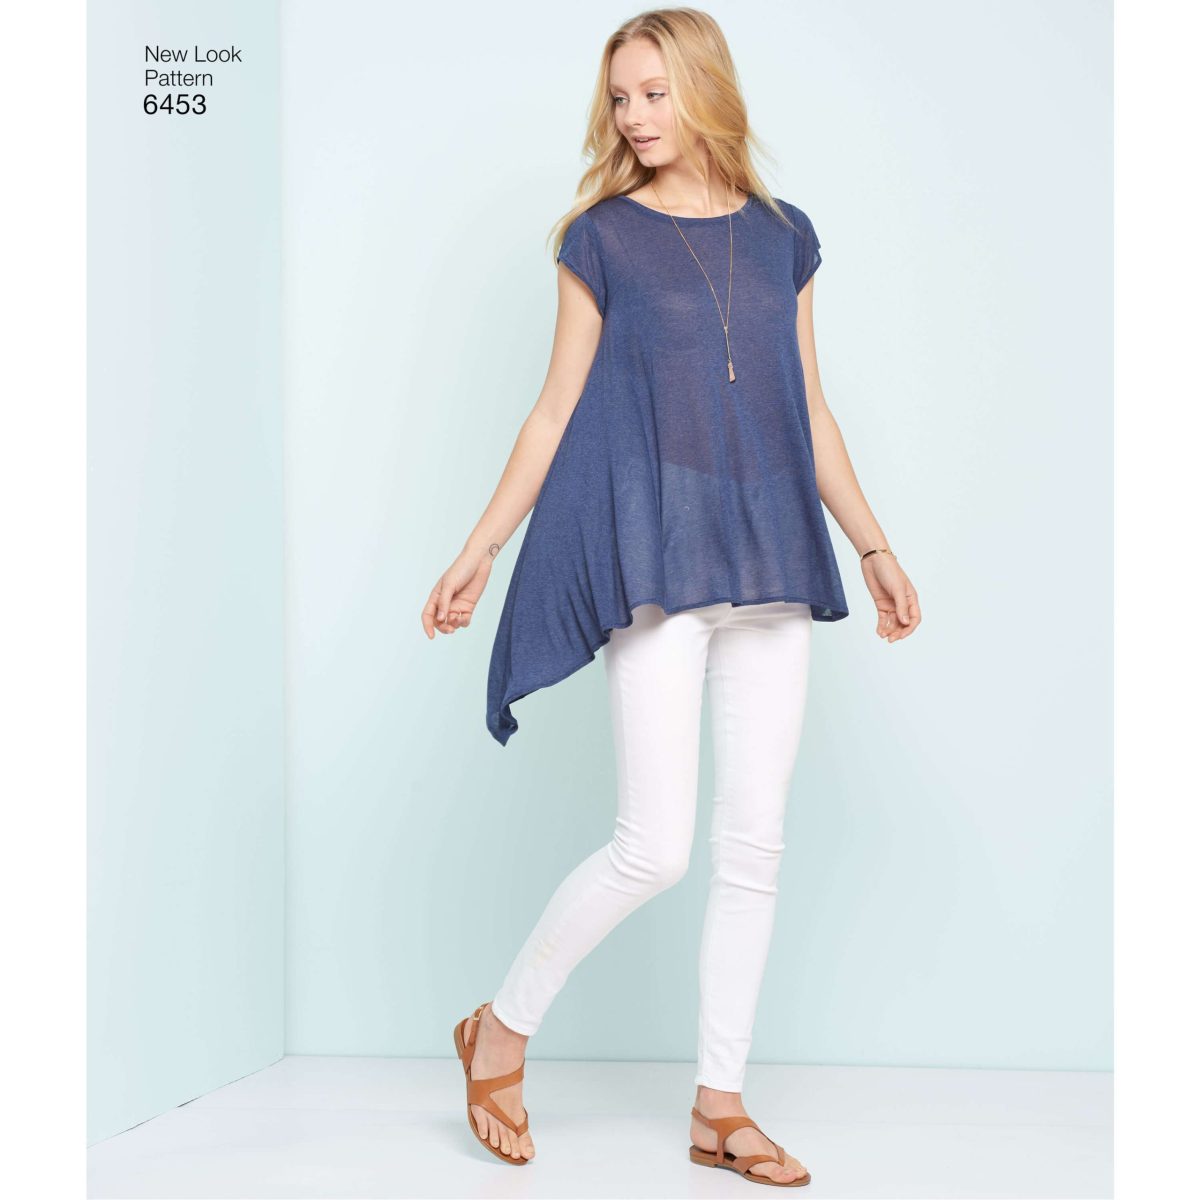 New Look Sewing Pattern N6453 Misses' Easy Knit Tops